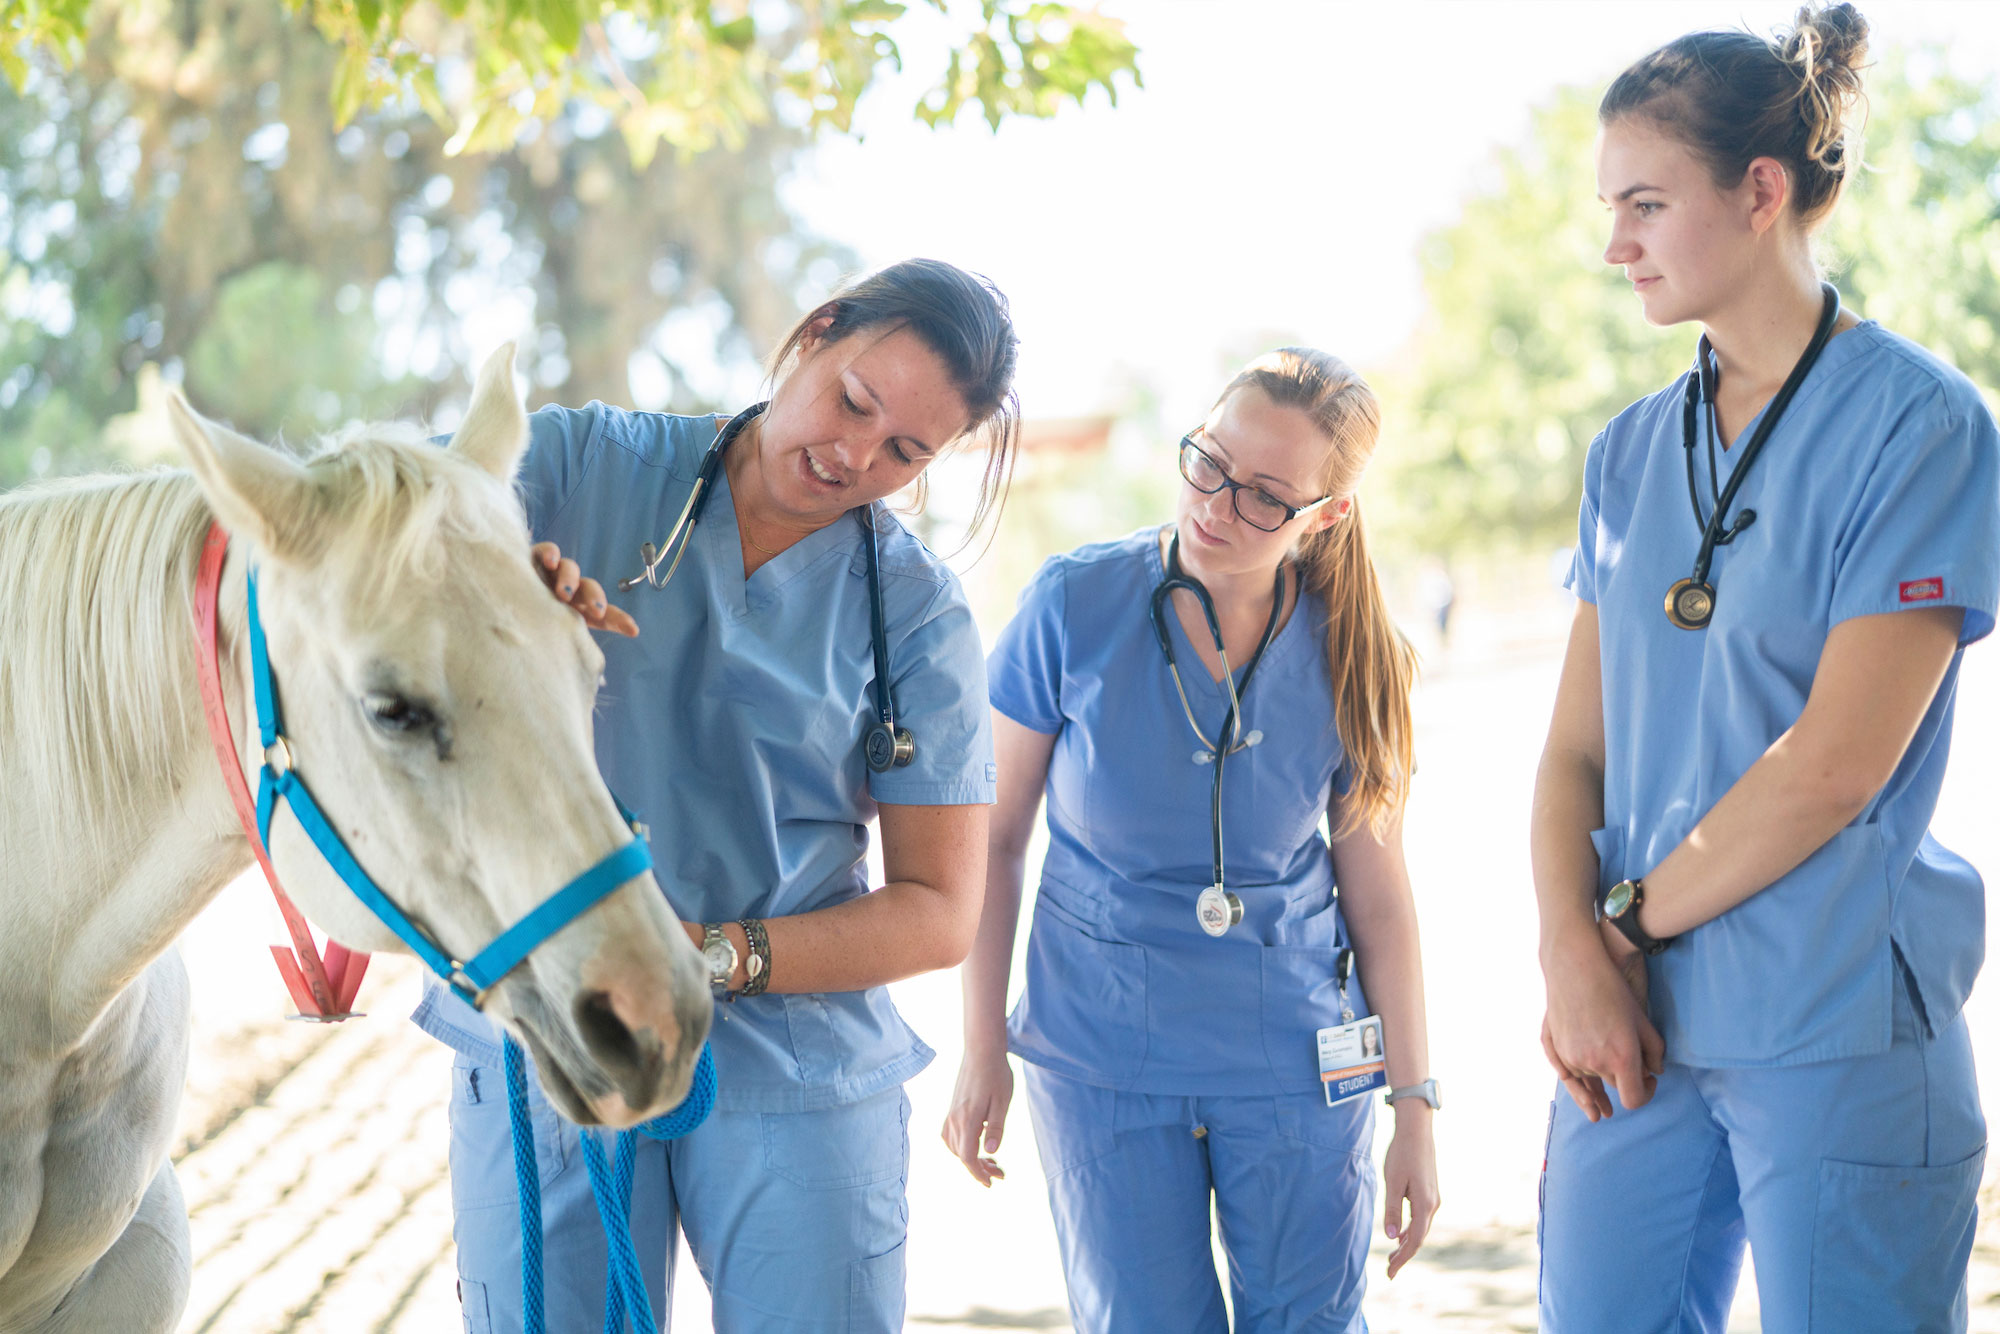 First-year veterinary medicine students learn how to check the health and how to work with horses at the Center for Equine Health